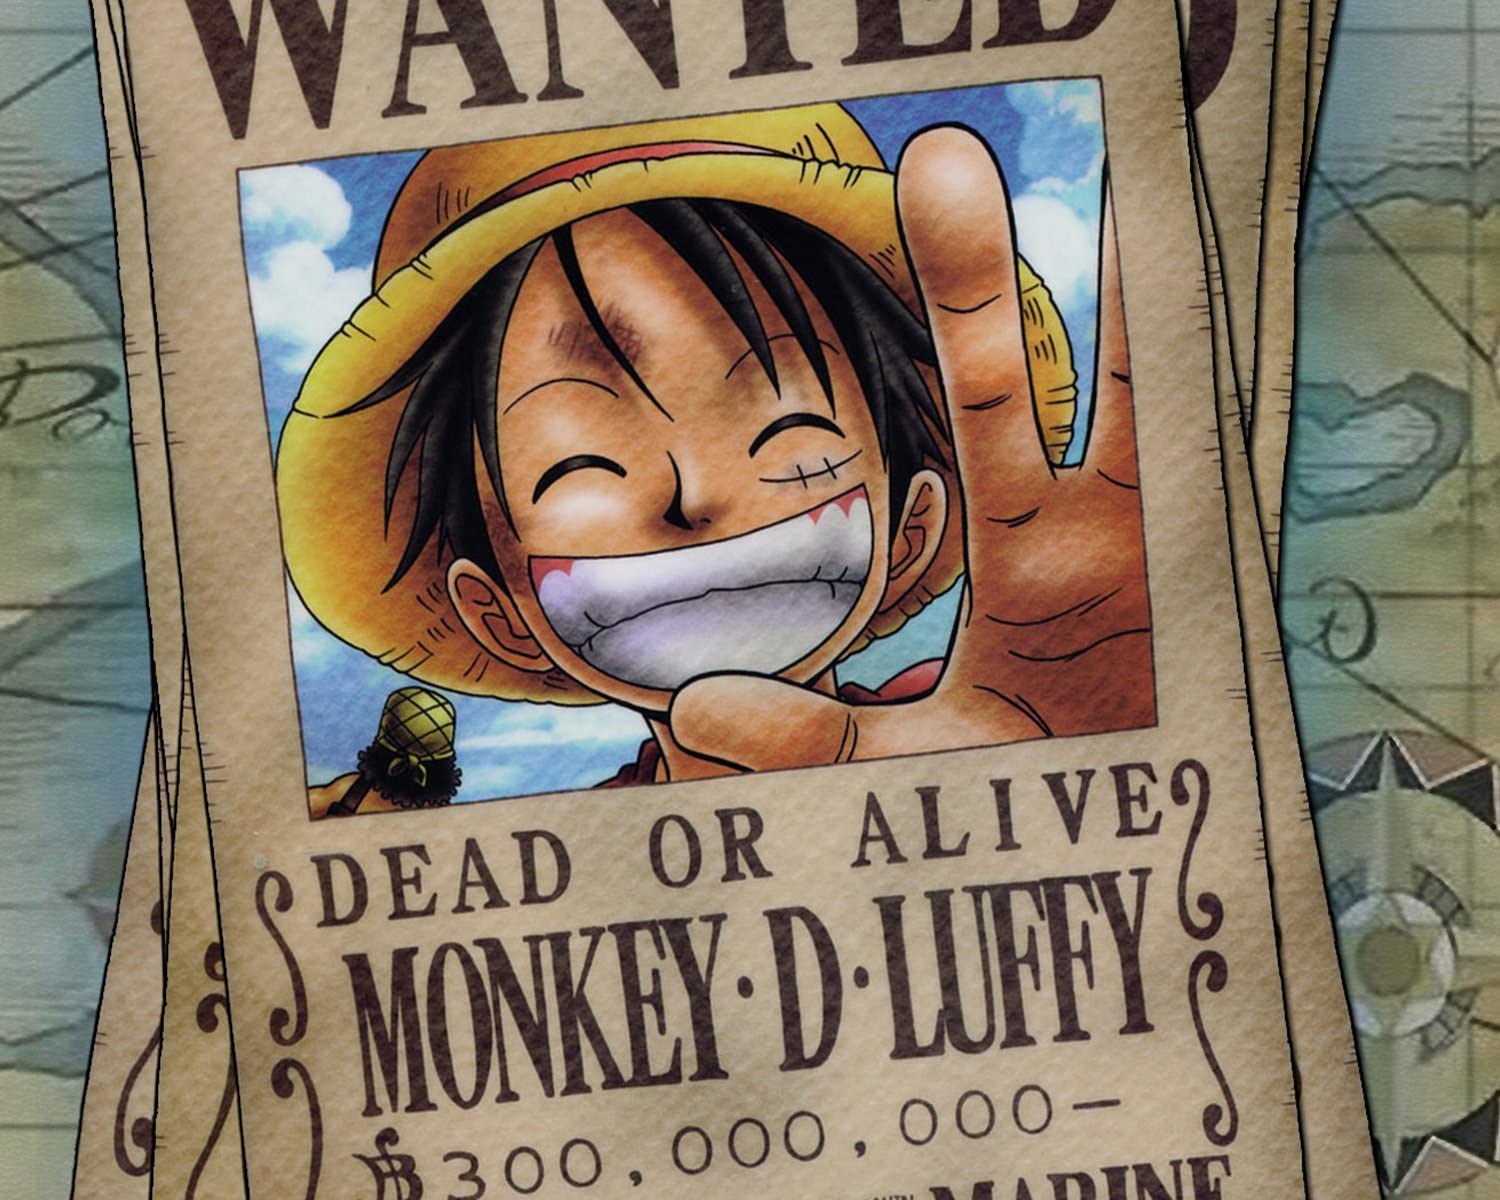 Superior Posters One Piece Monkey D. Luffy 8 Wanted Poster Japanese Anime Manga Wall Art Print Decor 16x20 Inches Print: Posters & Prints